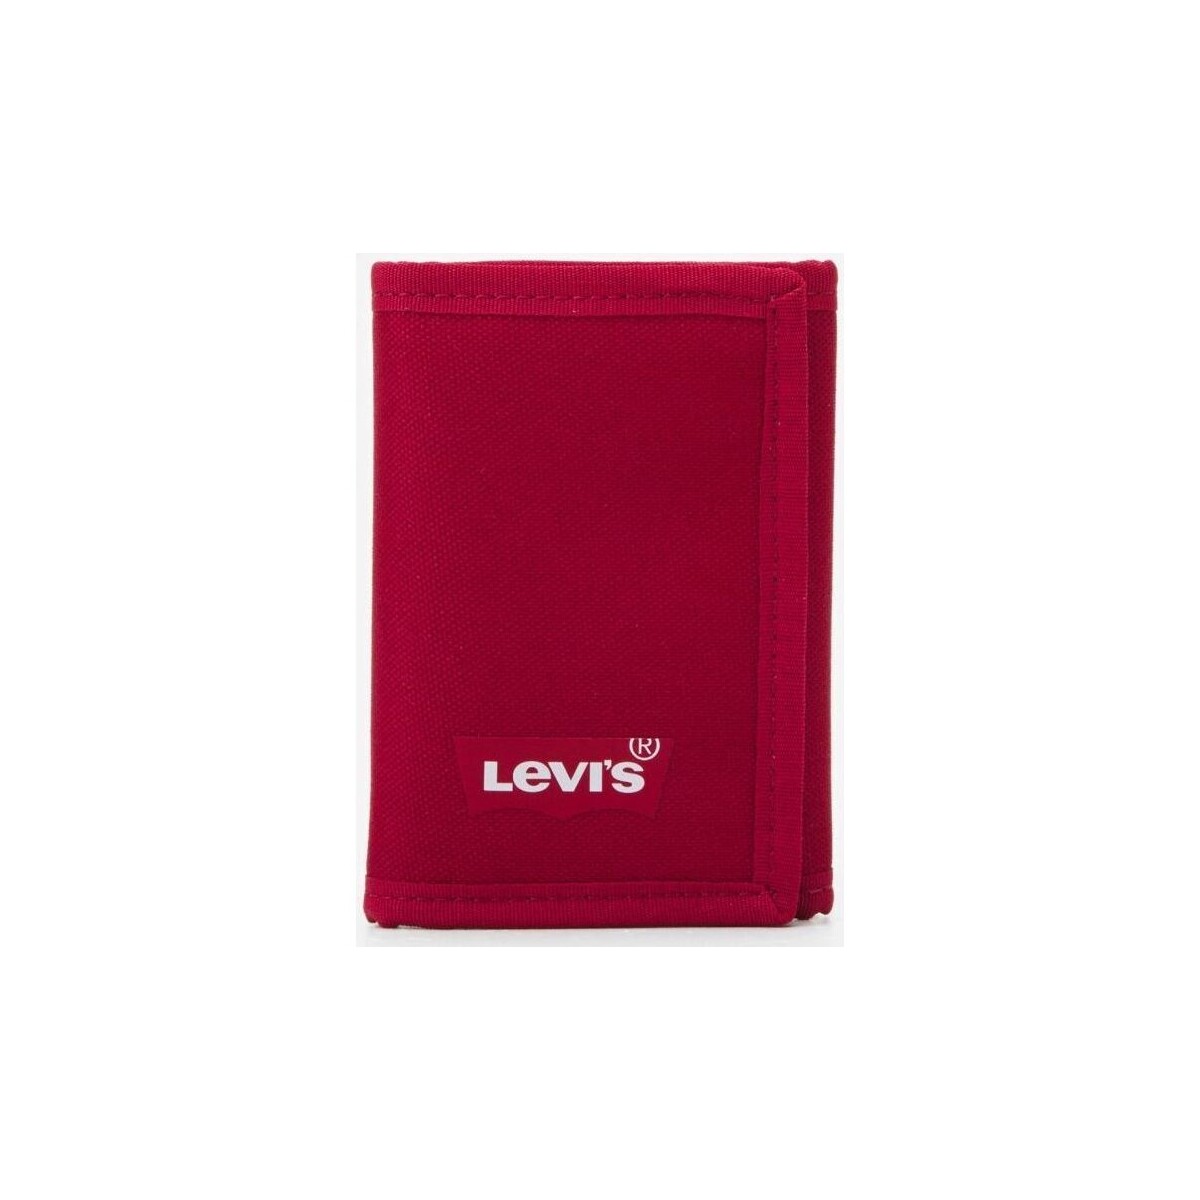 Sacs Portefeuilles Levi's 233055 00208 BATWING TRIFOLD-087 RED Rouge